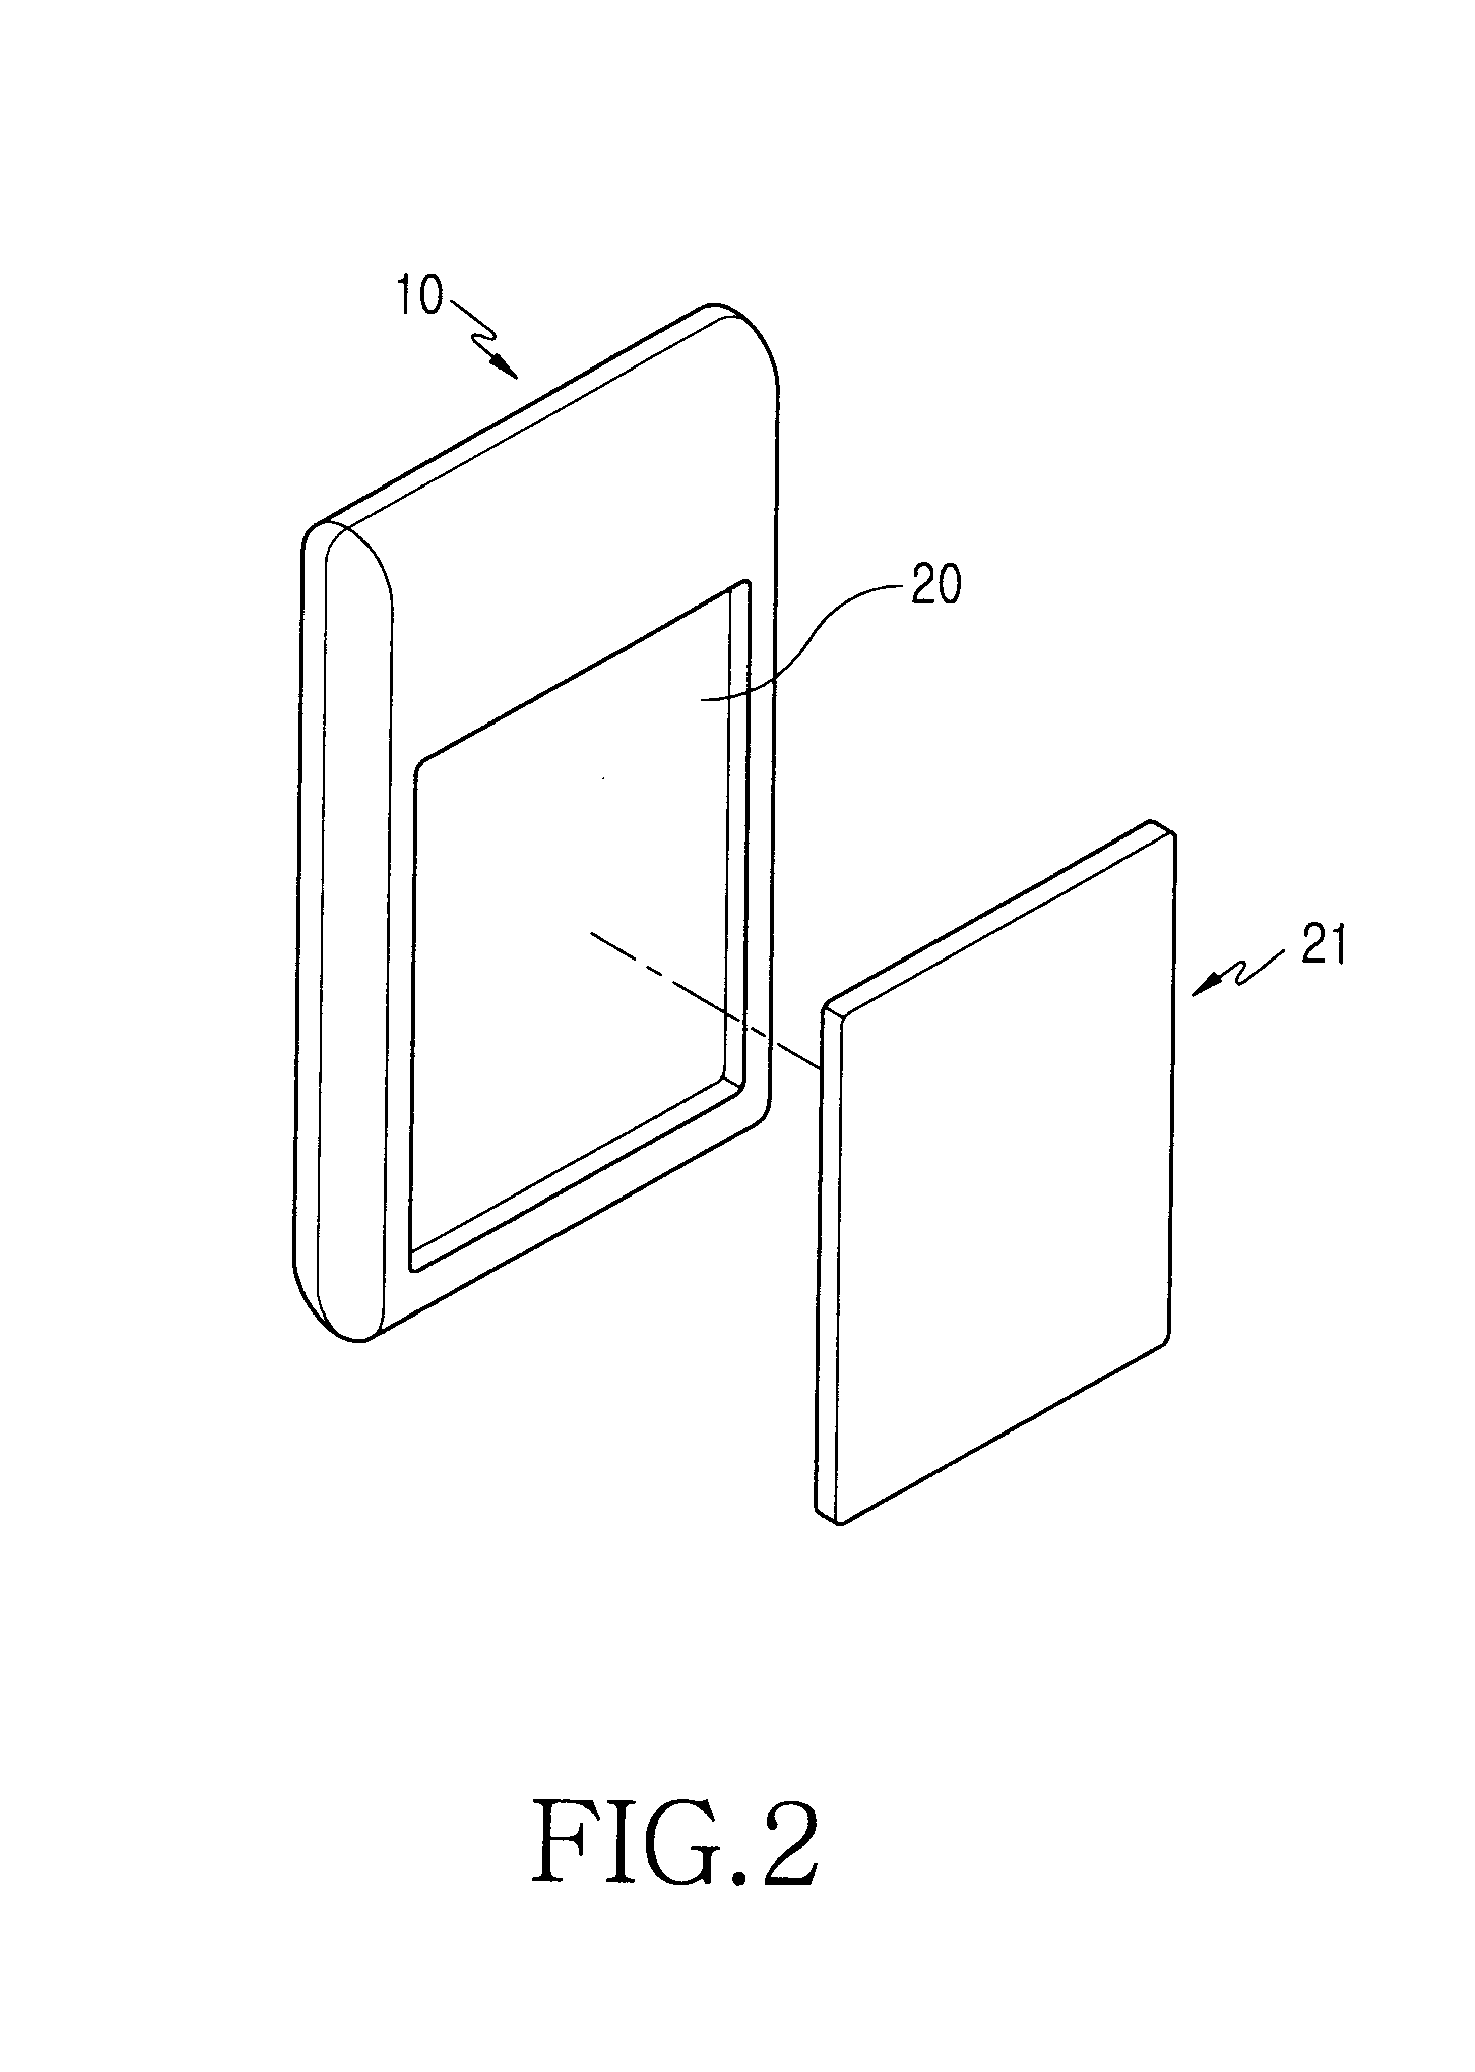 Protective cover for portable communication device